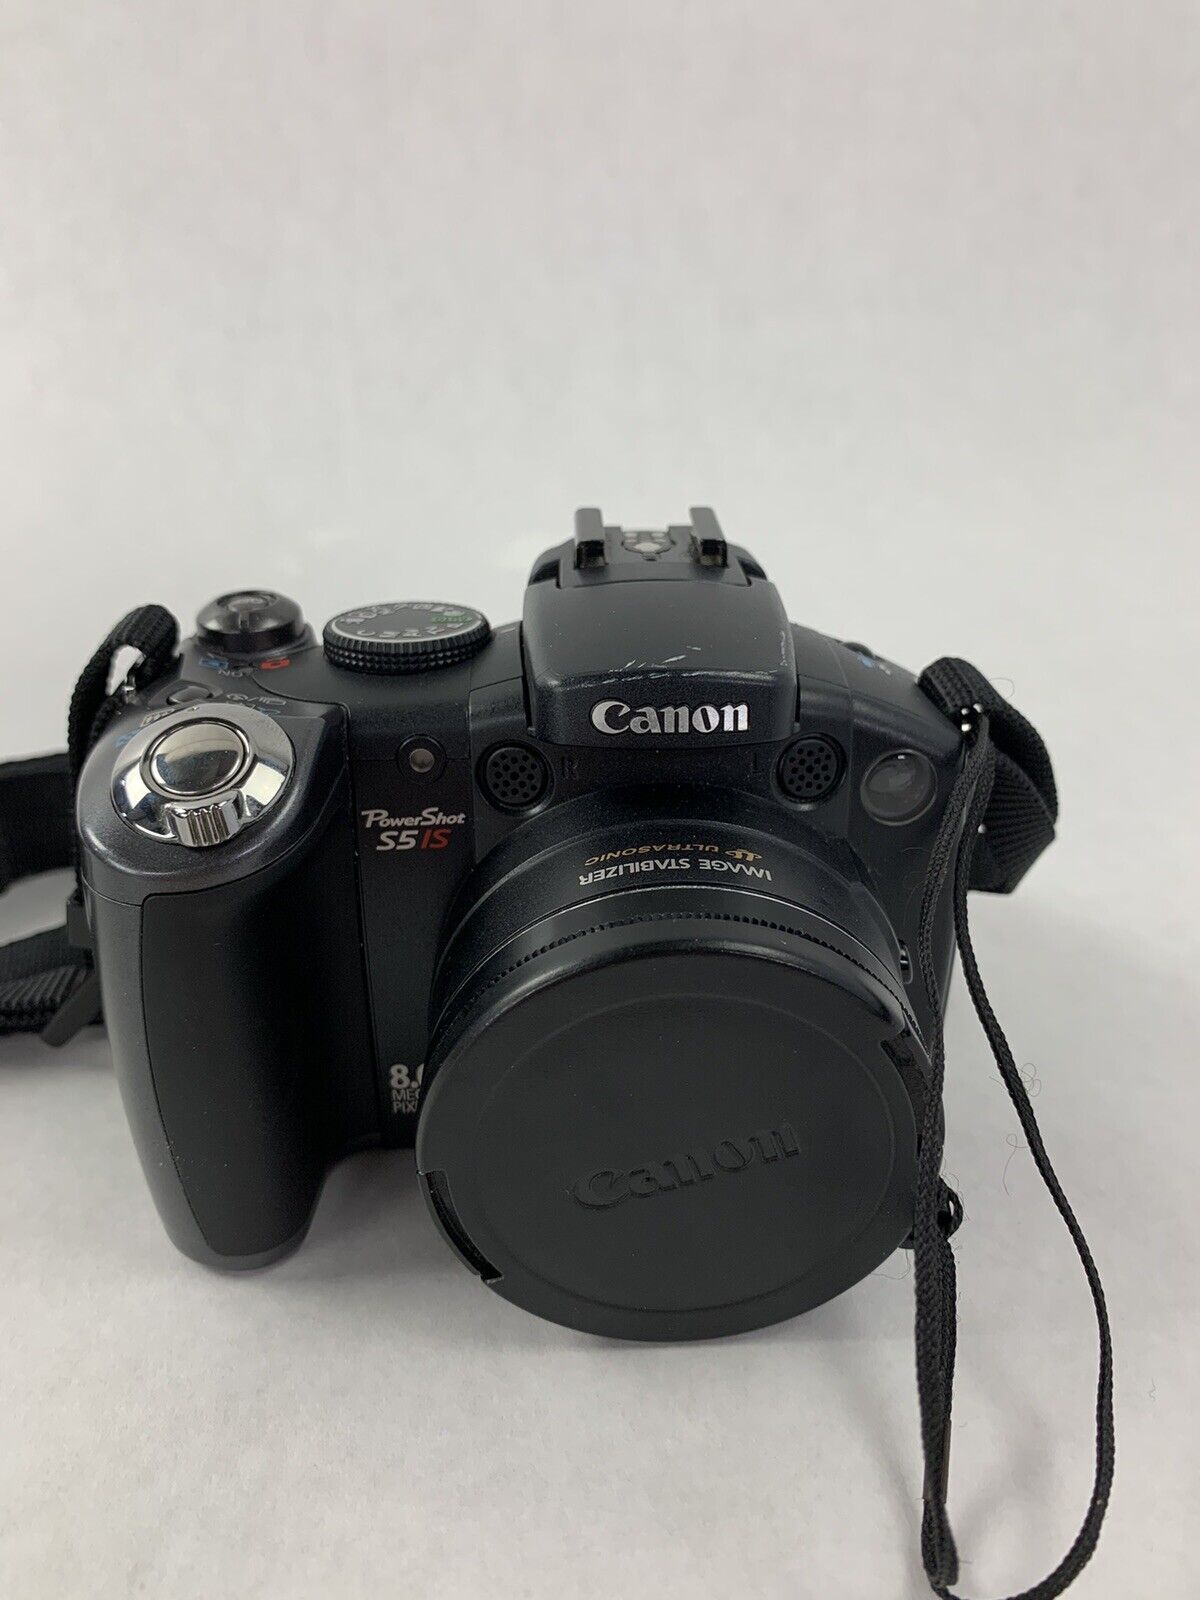 Canon PowerShot S5 IS Digital Cameral 8.0MP 12x Optical Zoom pc1234 and Case